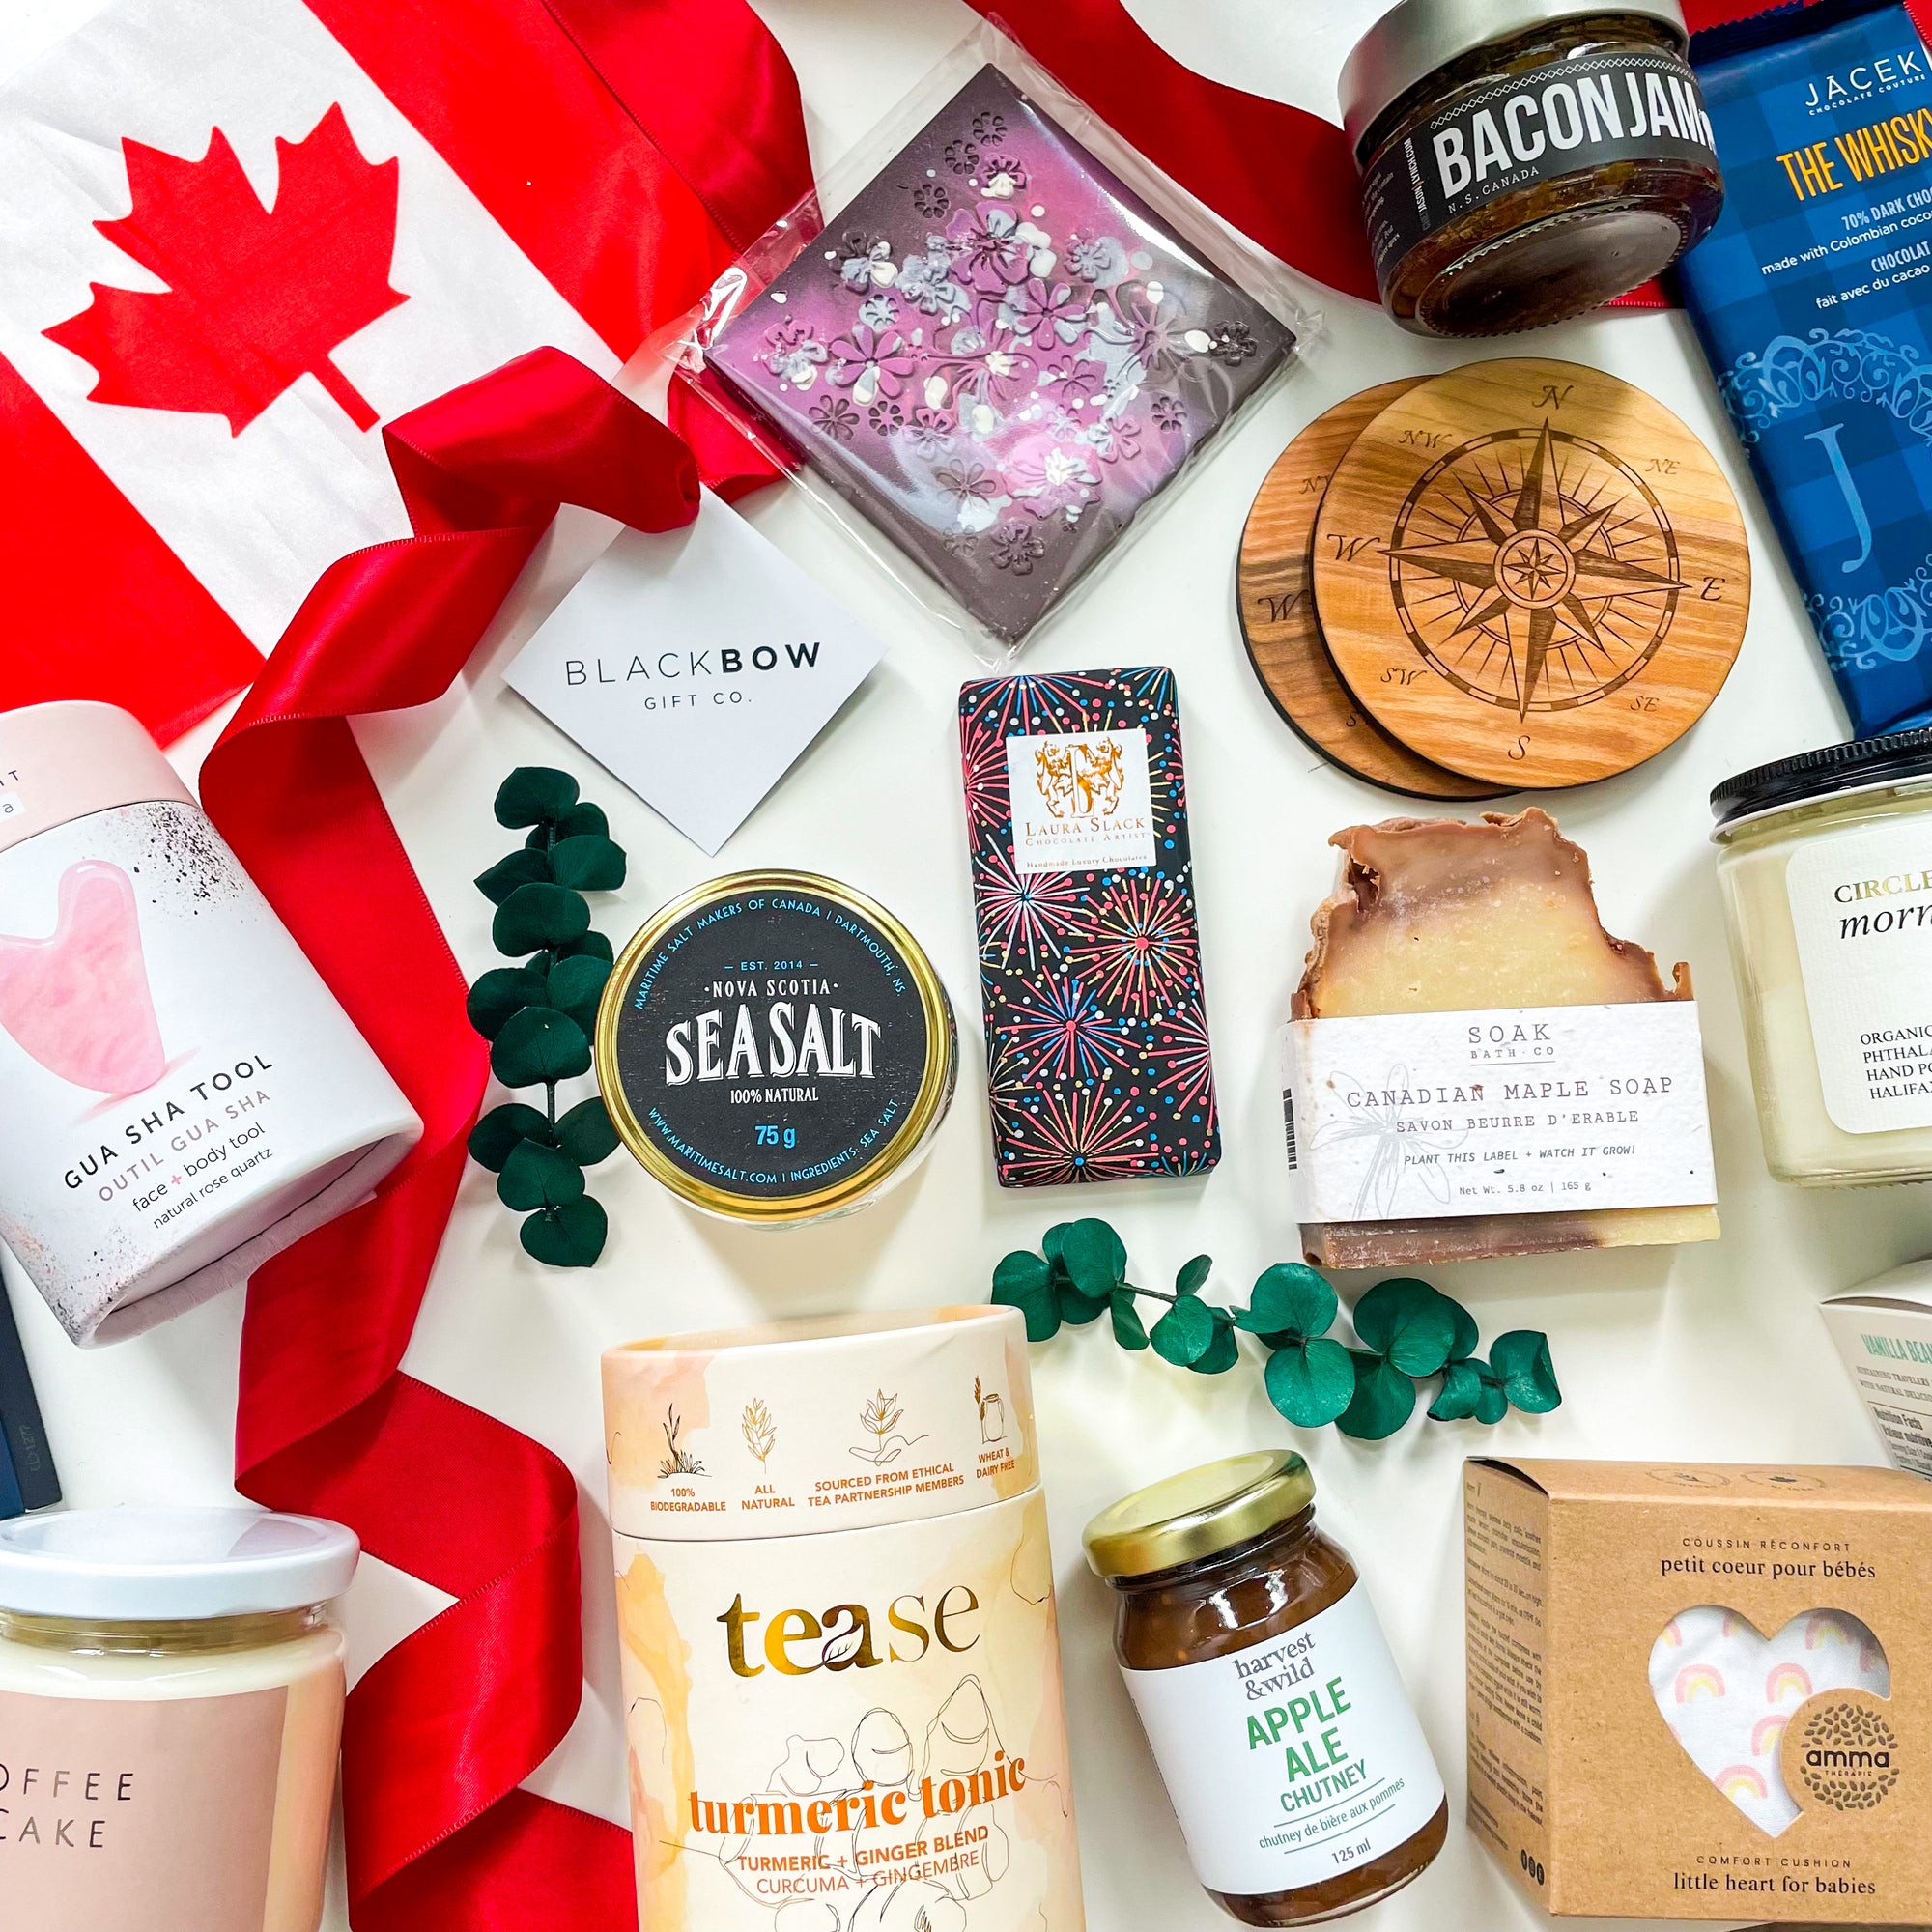 Canadian products, Canadian gift delivery, local gifts, local gift delivery, Halifax gift delivery, best canadian gifts, best canadian products, bdc small business week, small business week canada, #BDCsbw